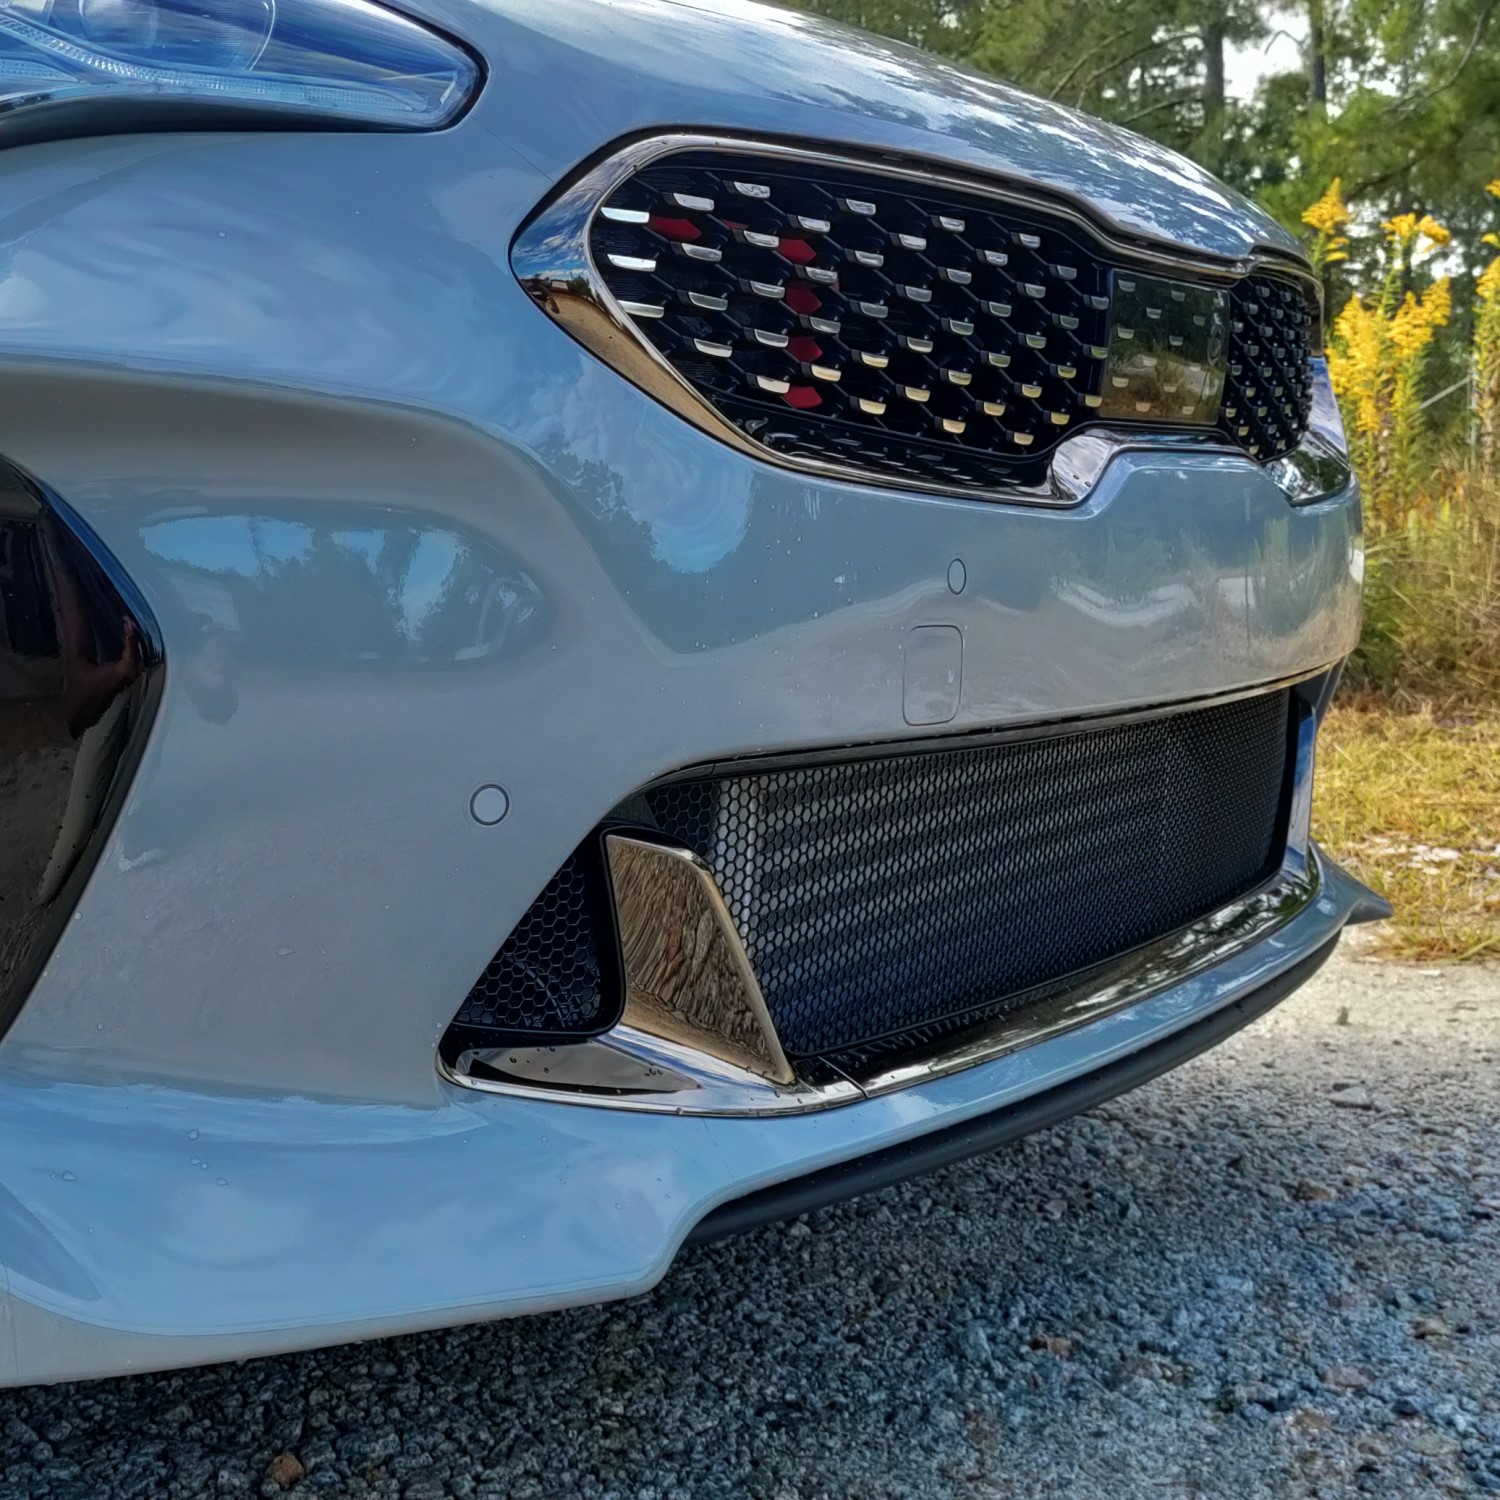 High Air Flow & High Visibility Grille Mod for the Lower Grille Openings on the Kia Stinger